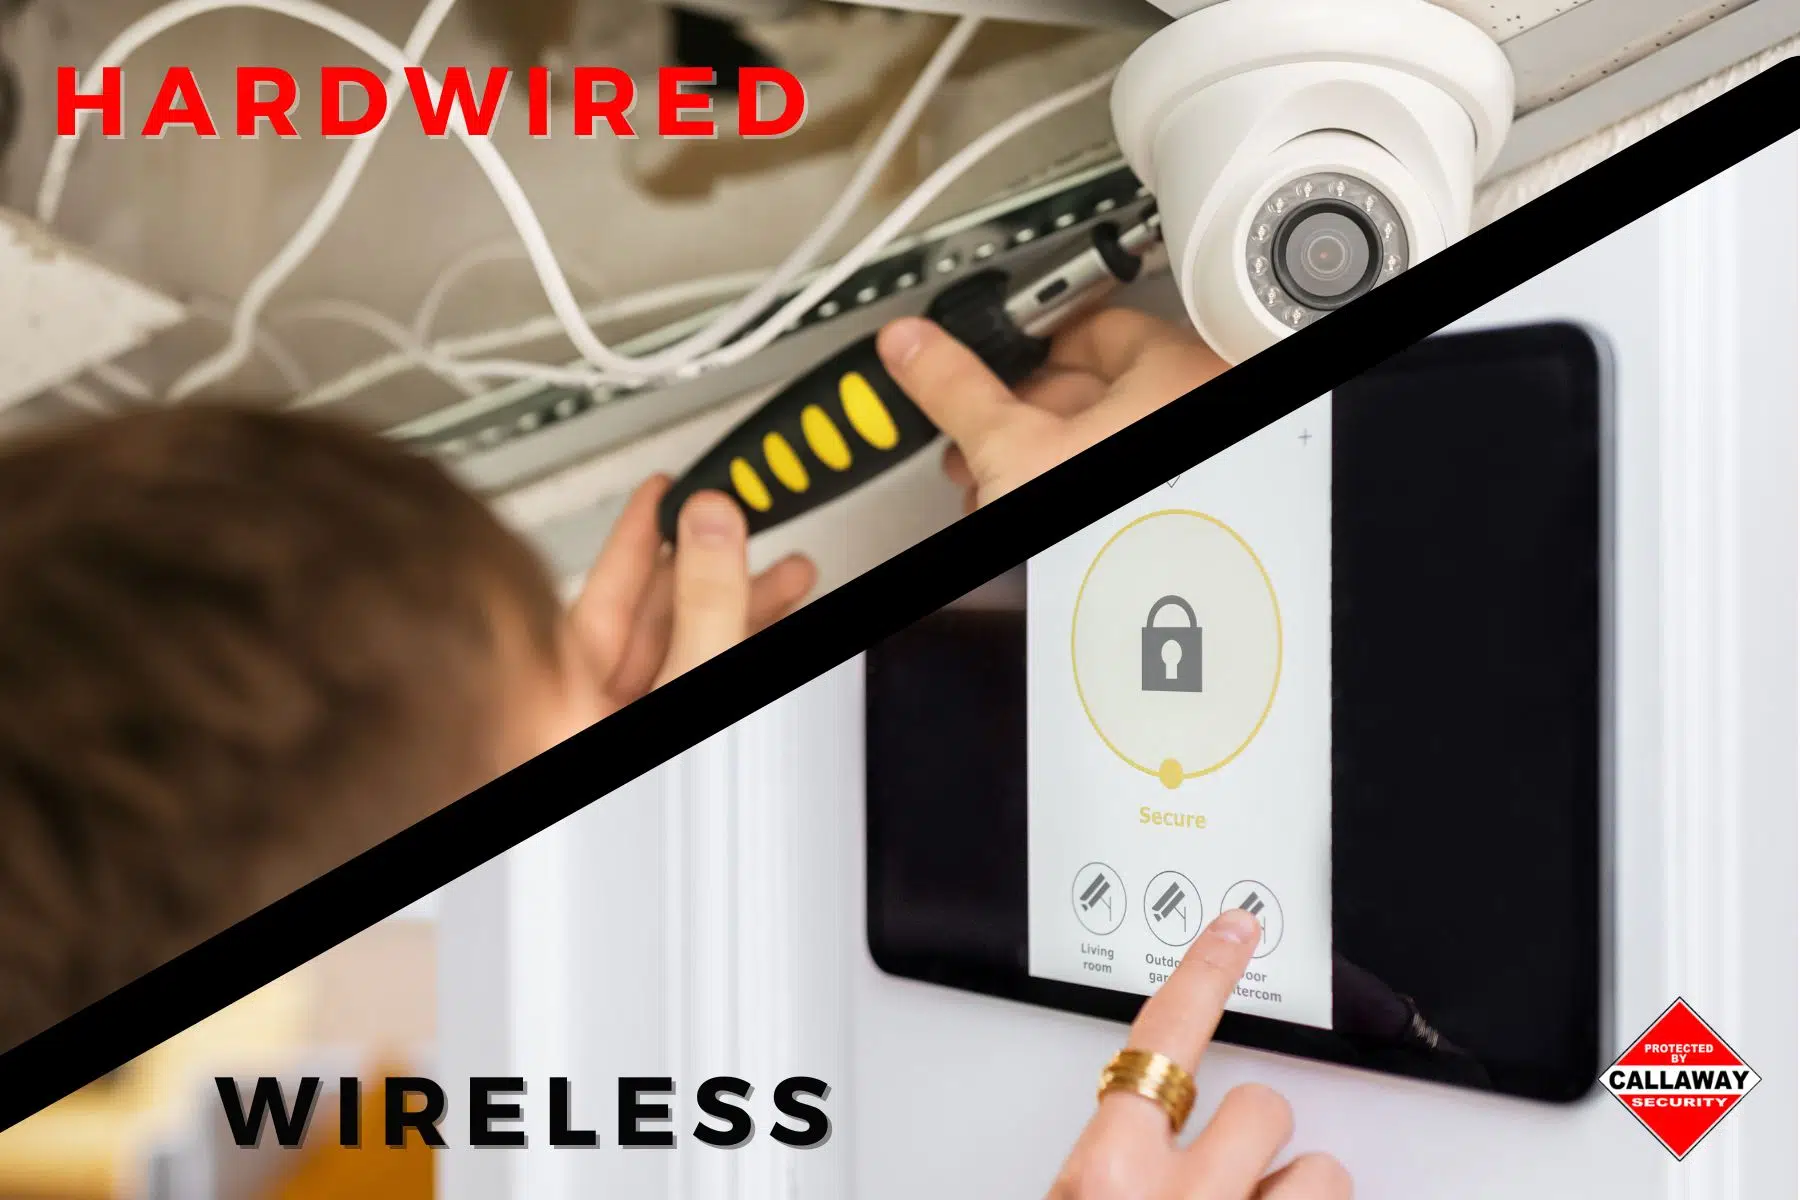 Home Security Systems ( Hardwired VS Wireless)